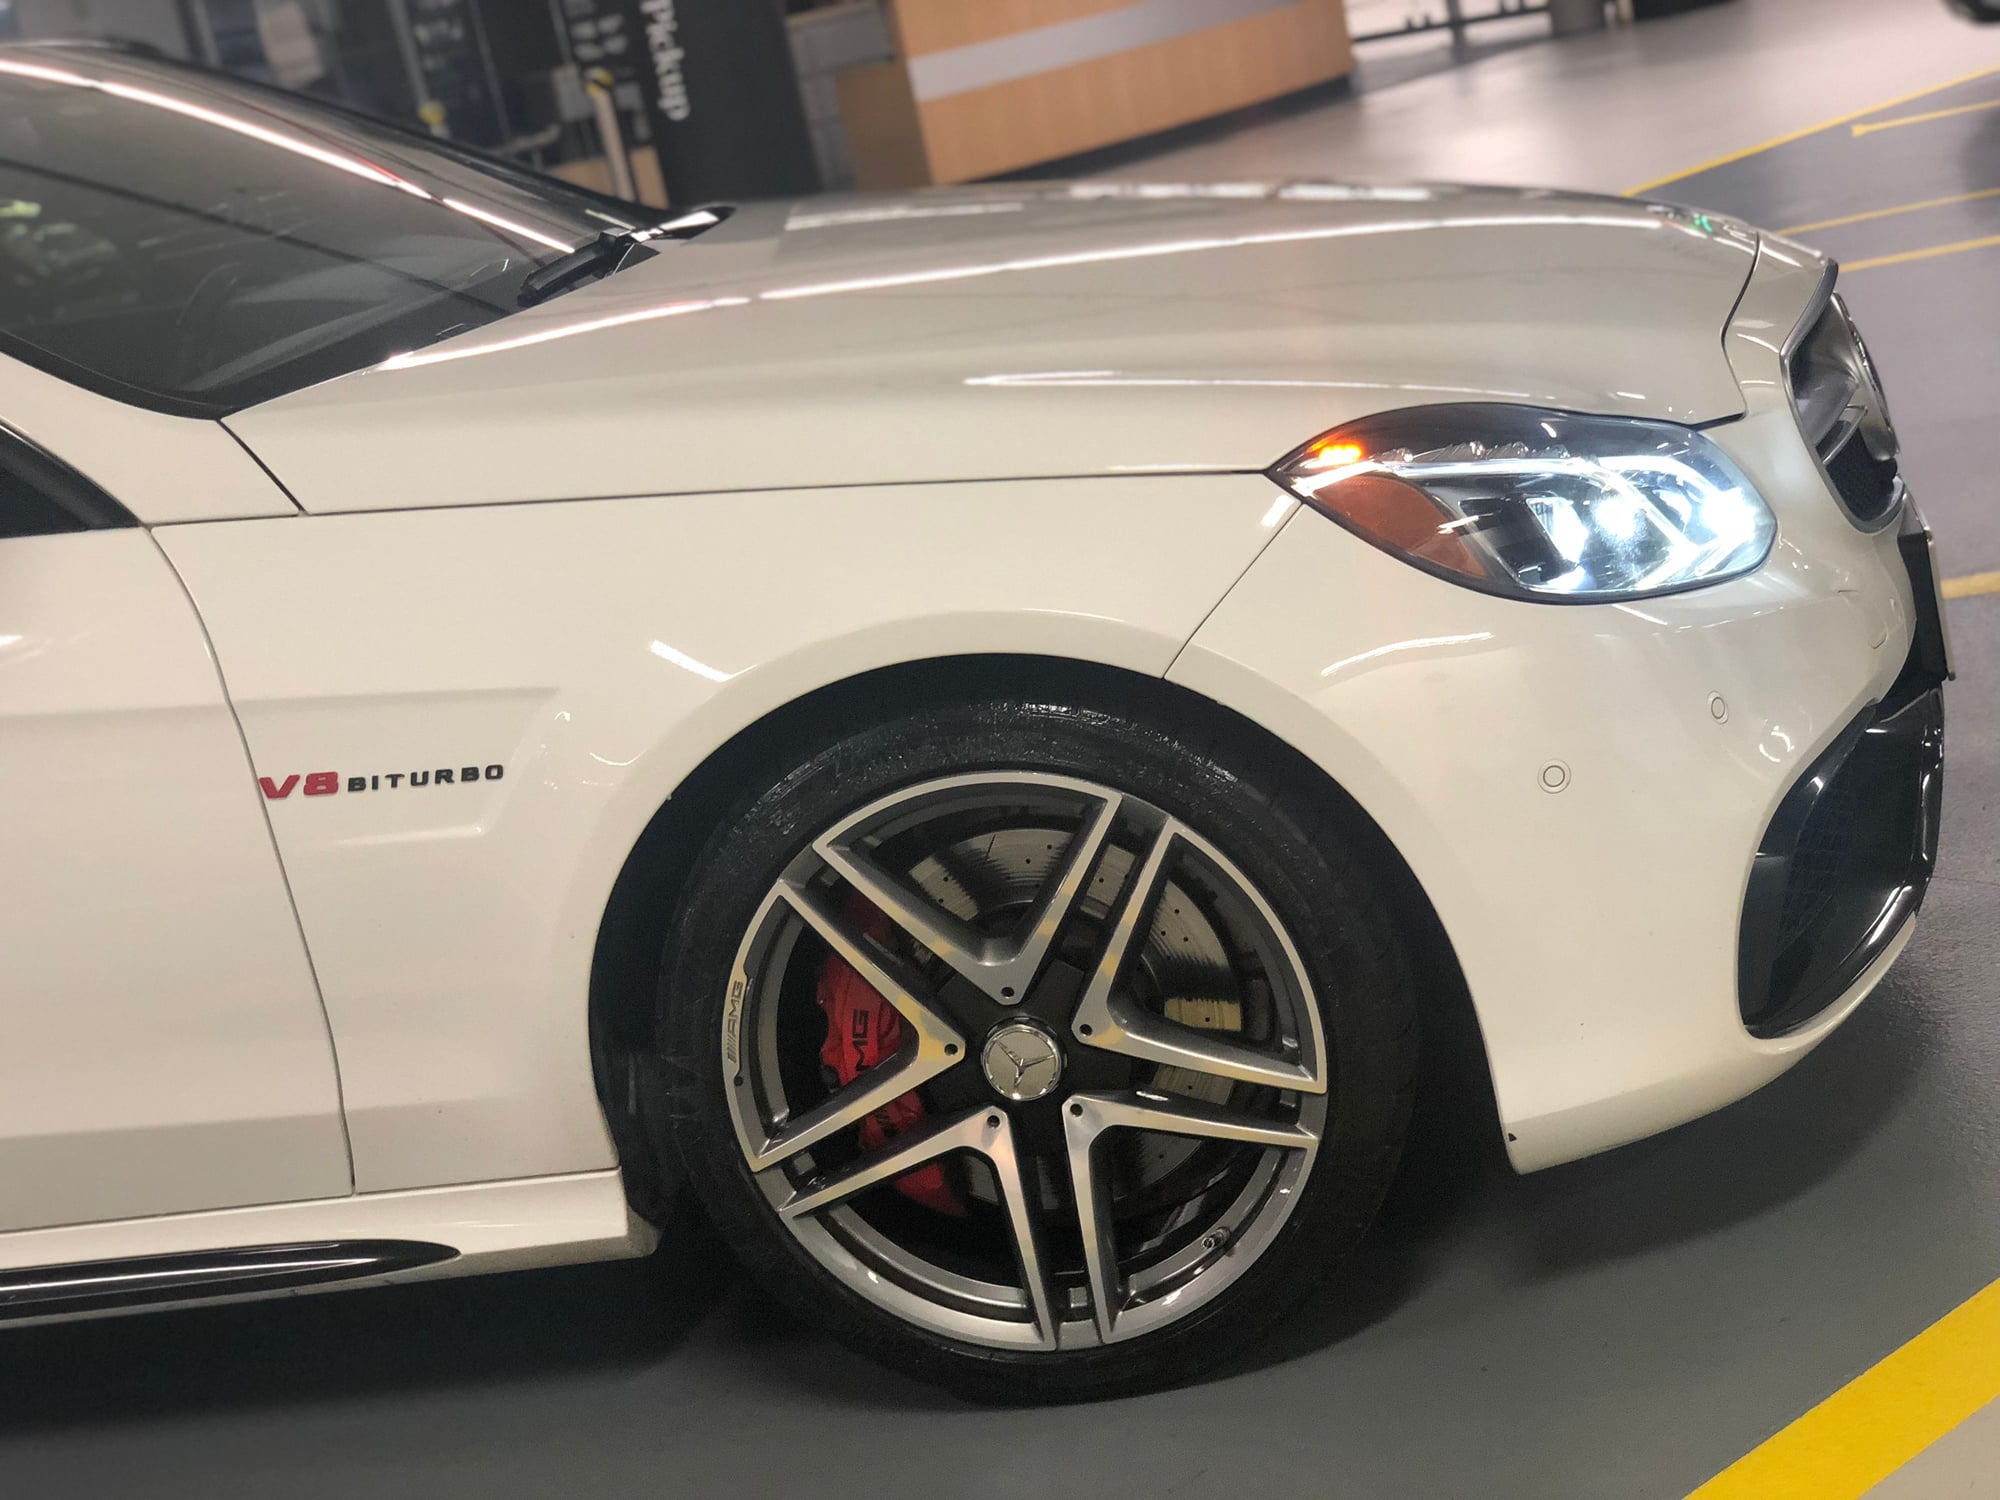 Wheels and Tires/Axles - like new oem 19" wheels and michelin pilot super sport tires - Used - 2010 to 2016 Mercedes-Benz E63 AMG S - Queens, NY 11368, United States